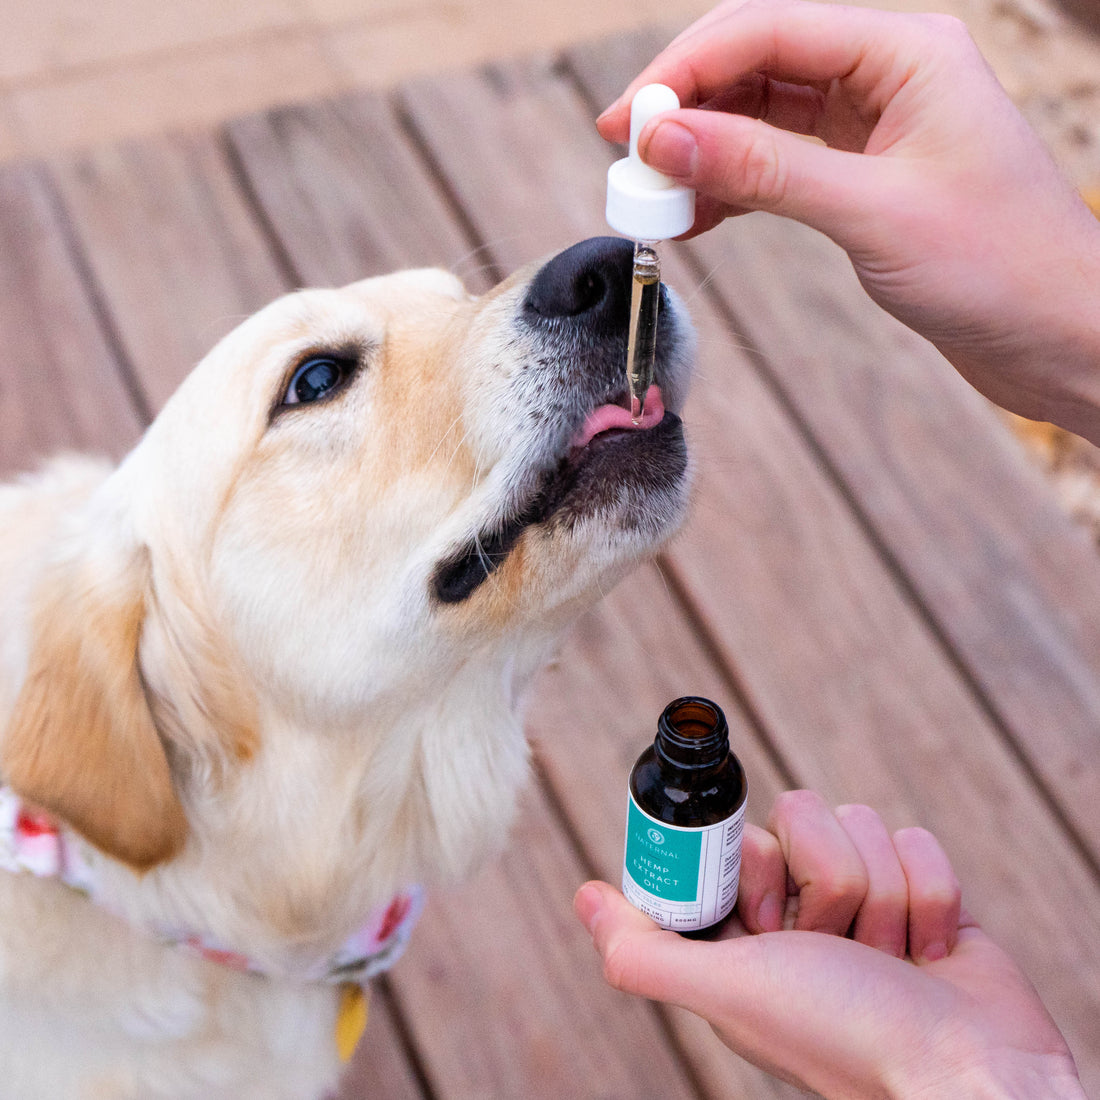 A dog being administered 1200mg CBD oil for pets